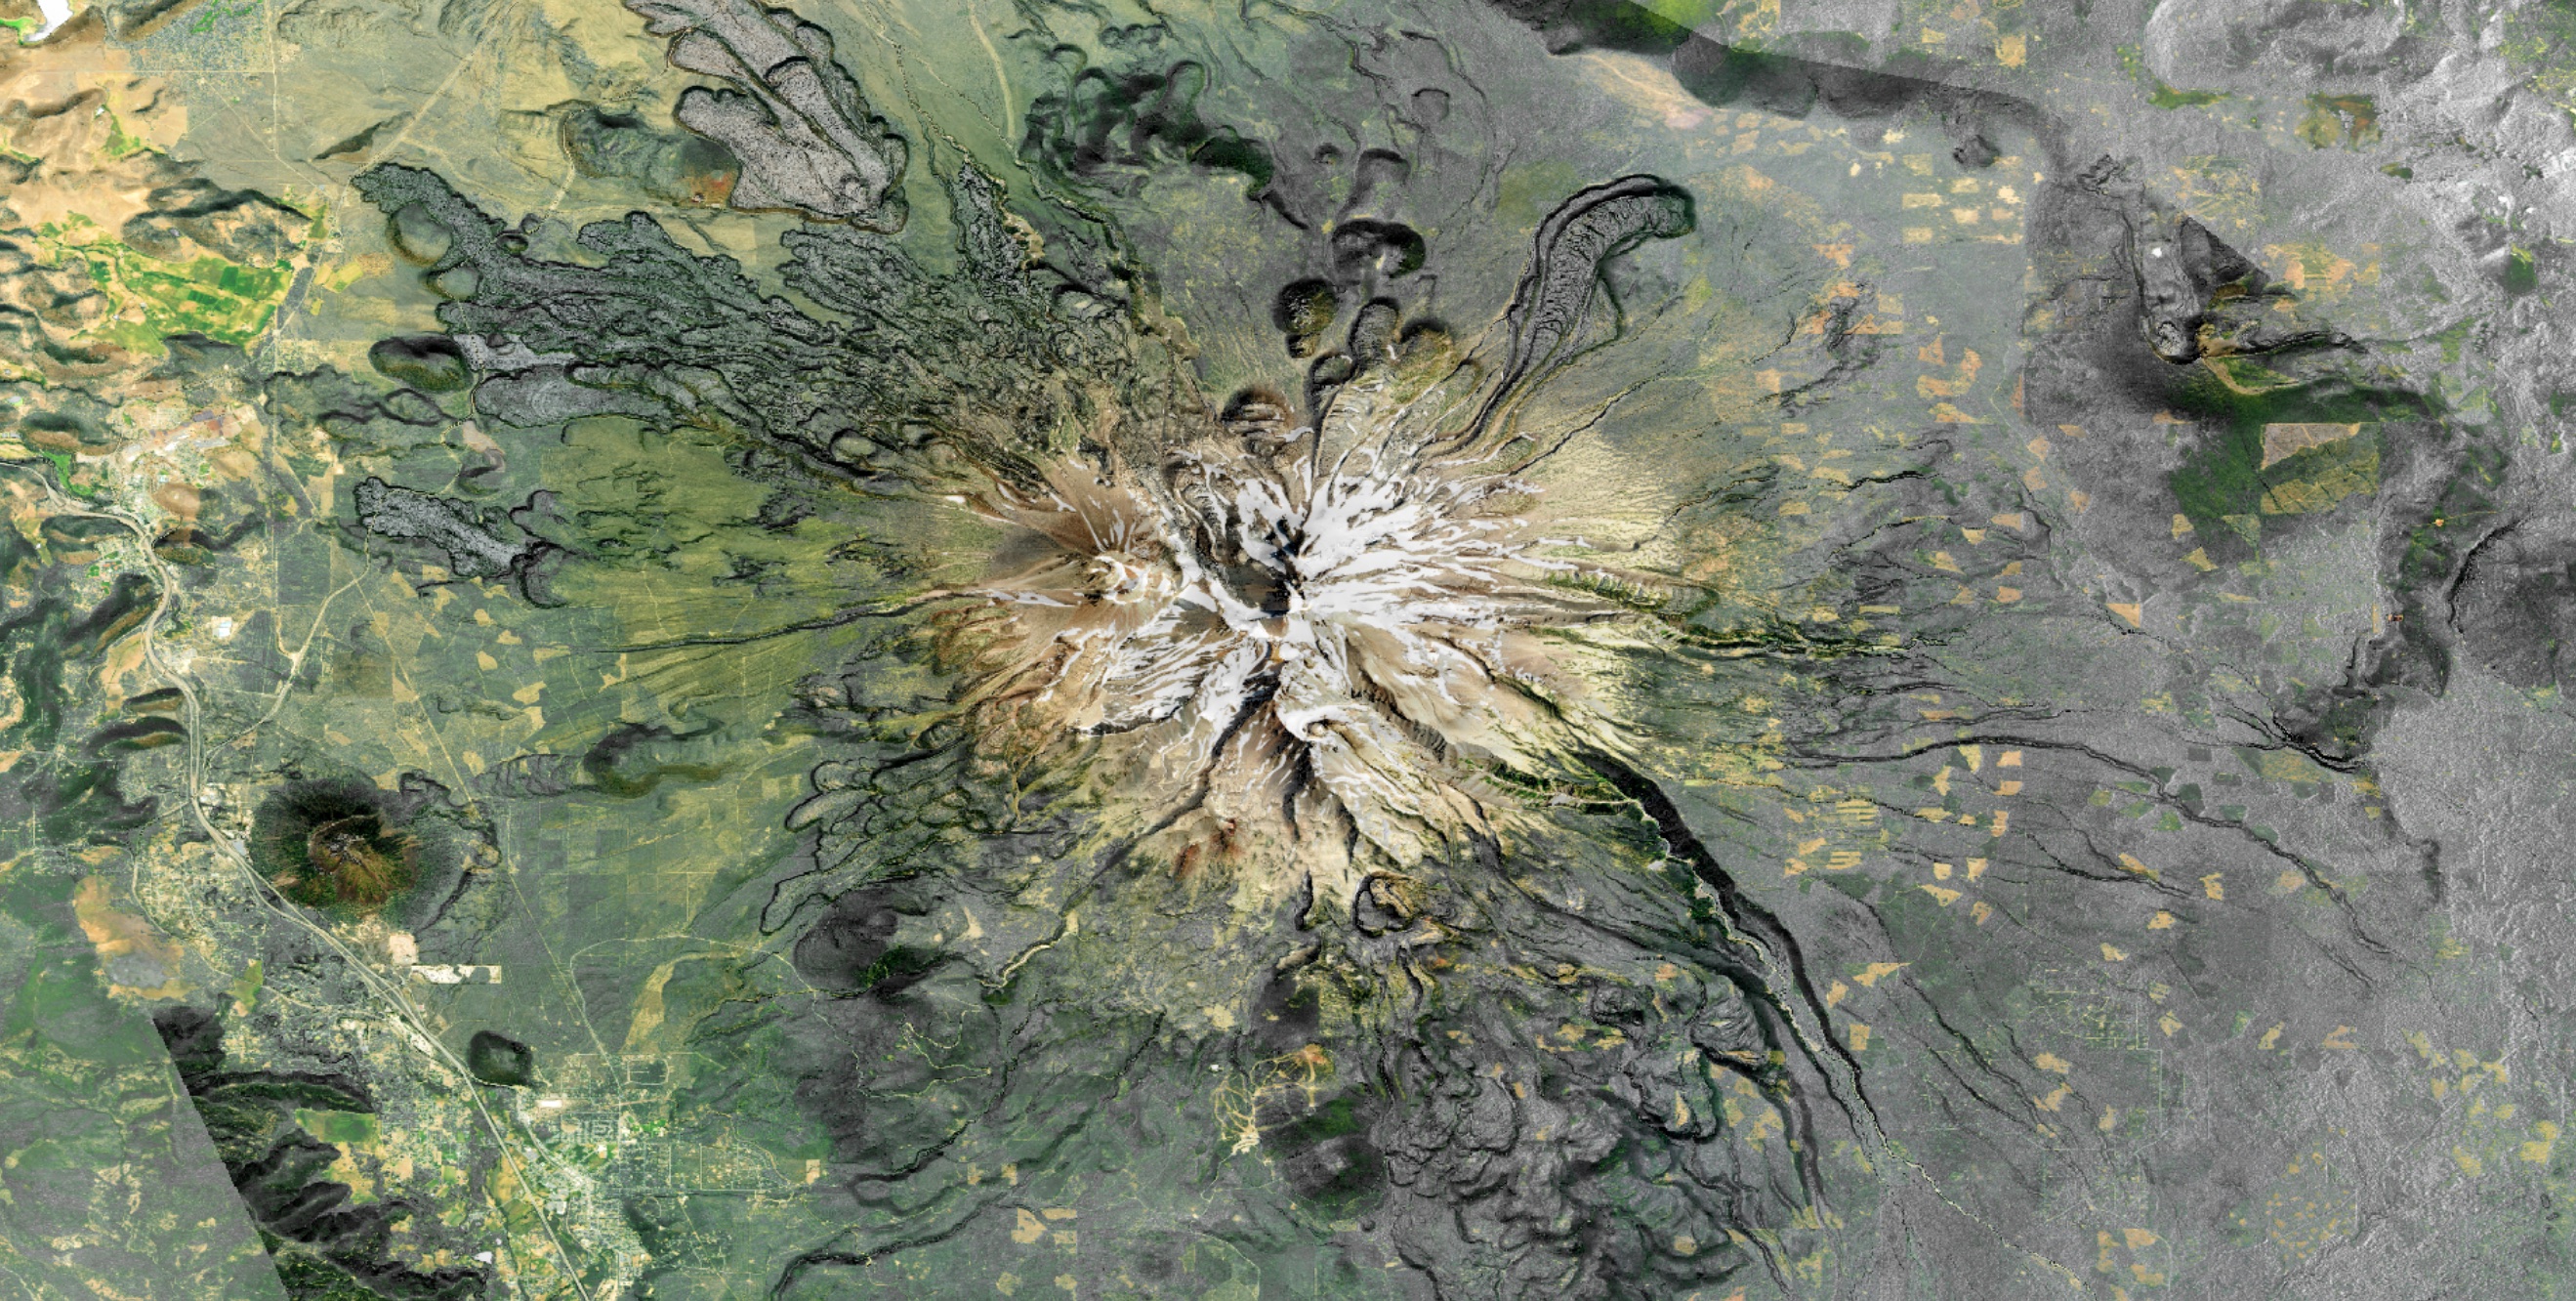 A satellite image of a mountain with a large crater.